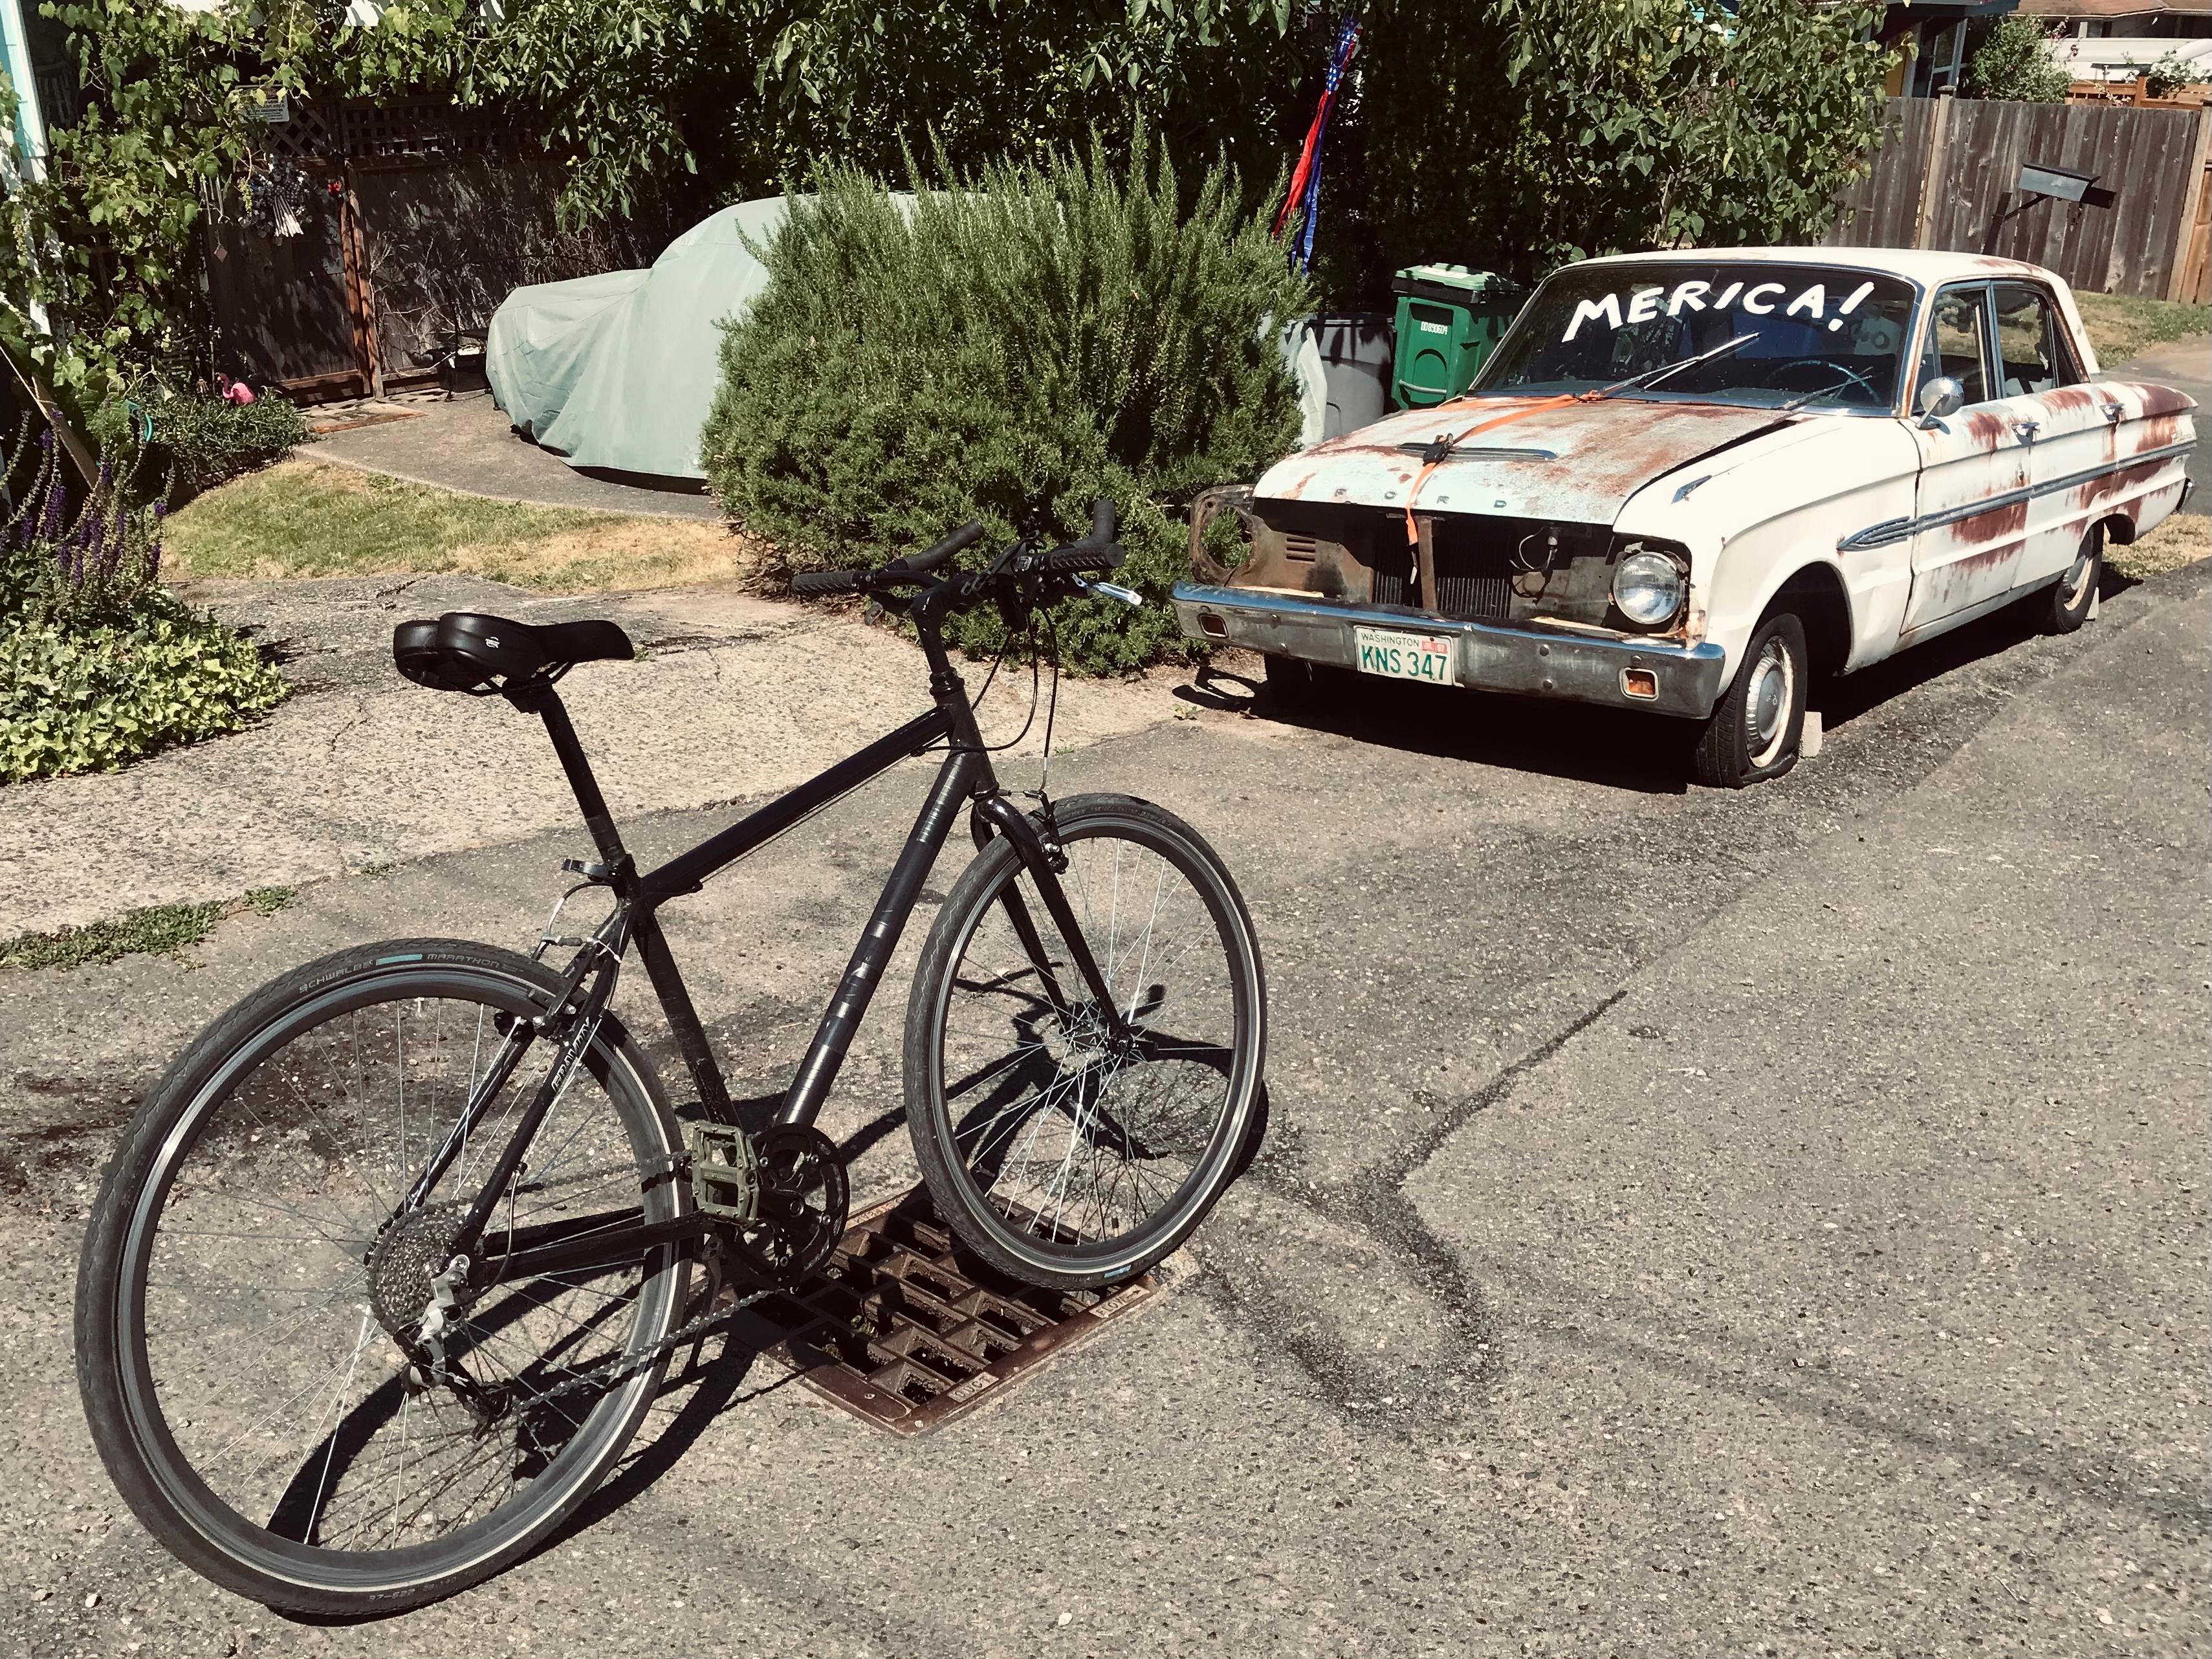 image of bicycle next to car with Merica painted on it